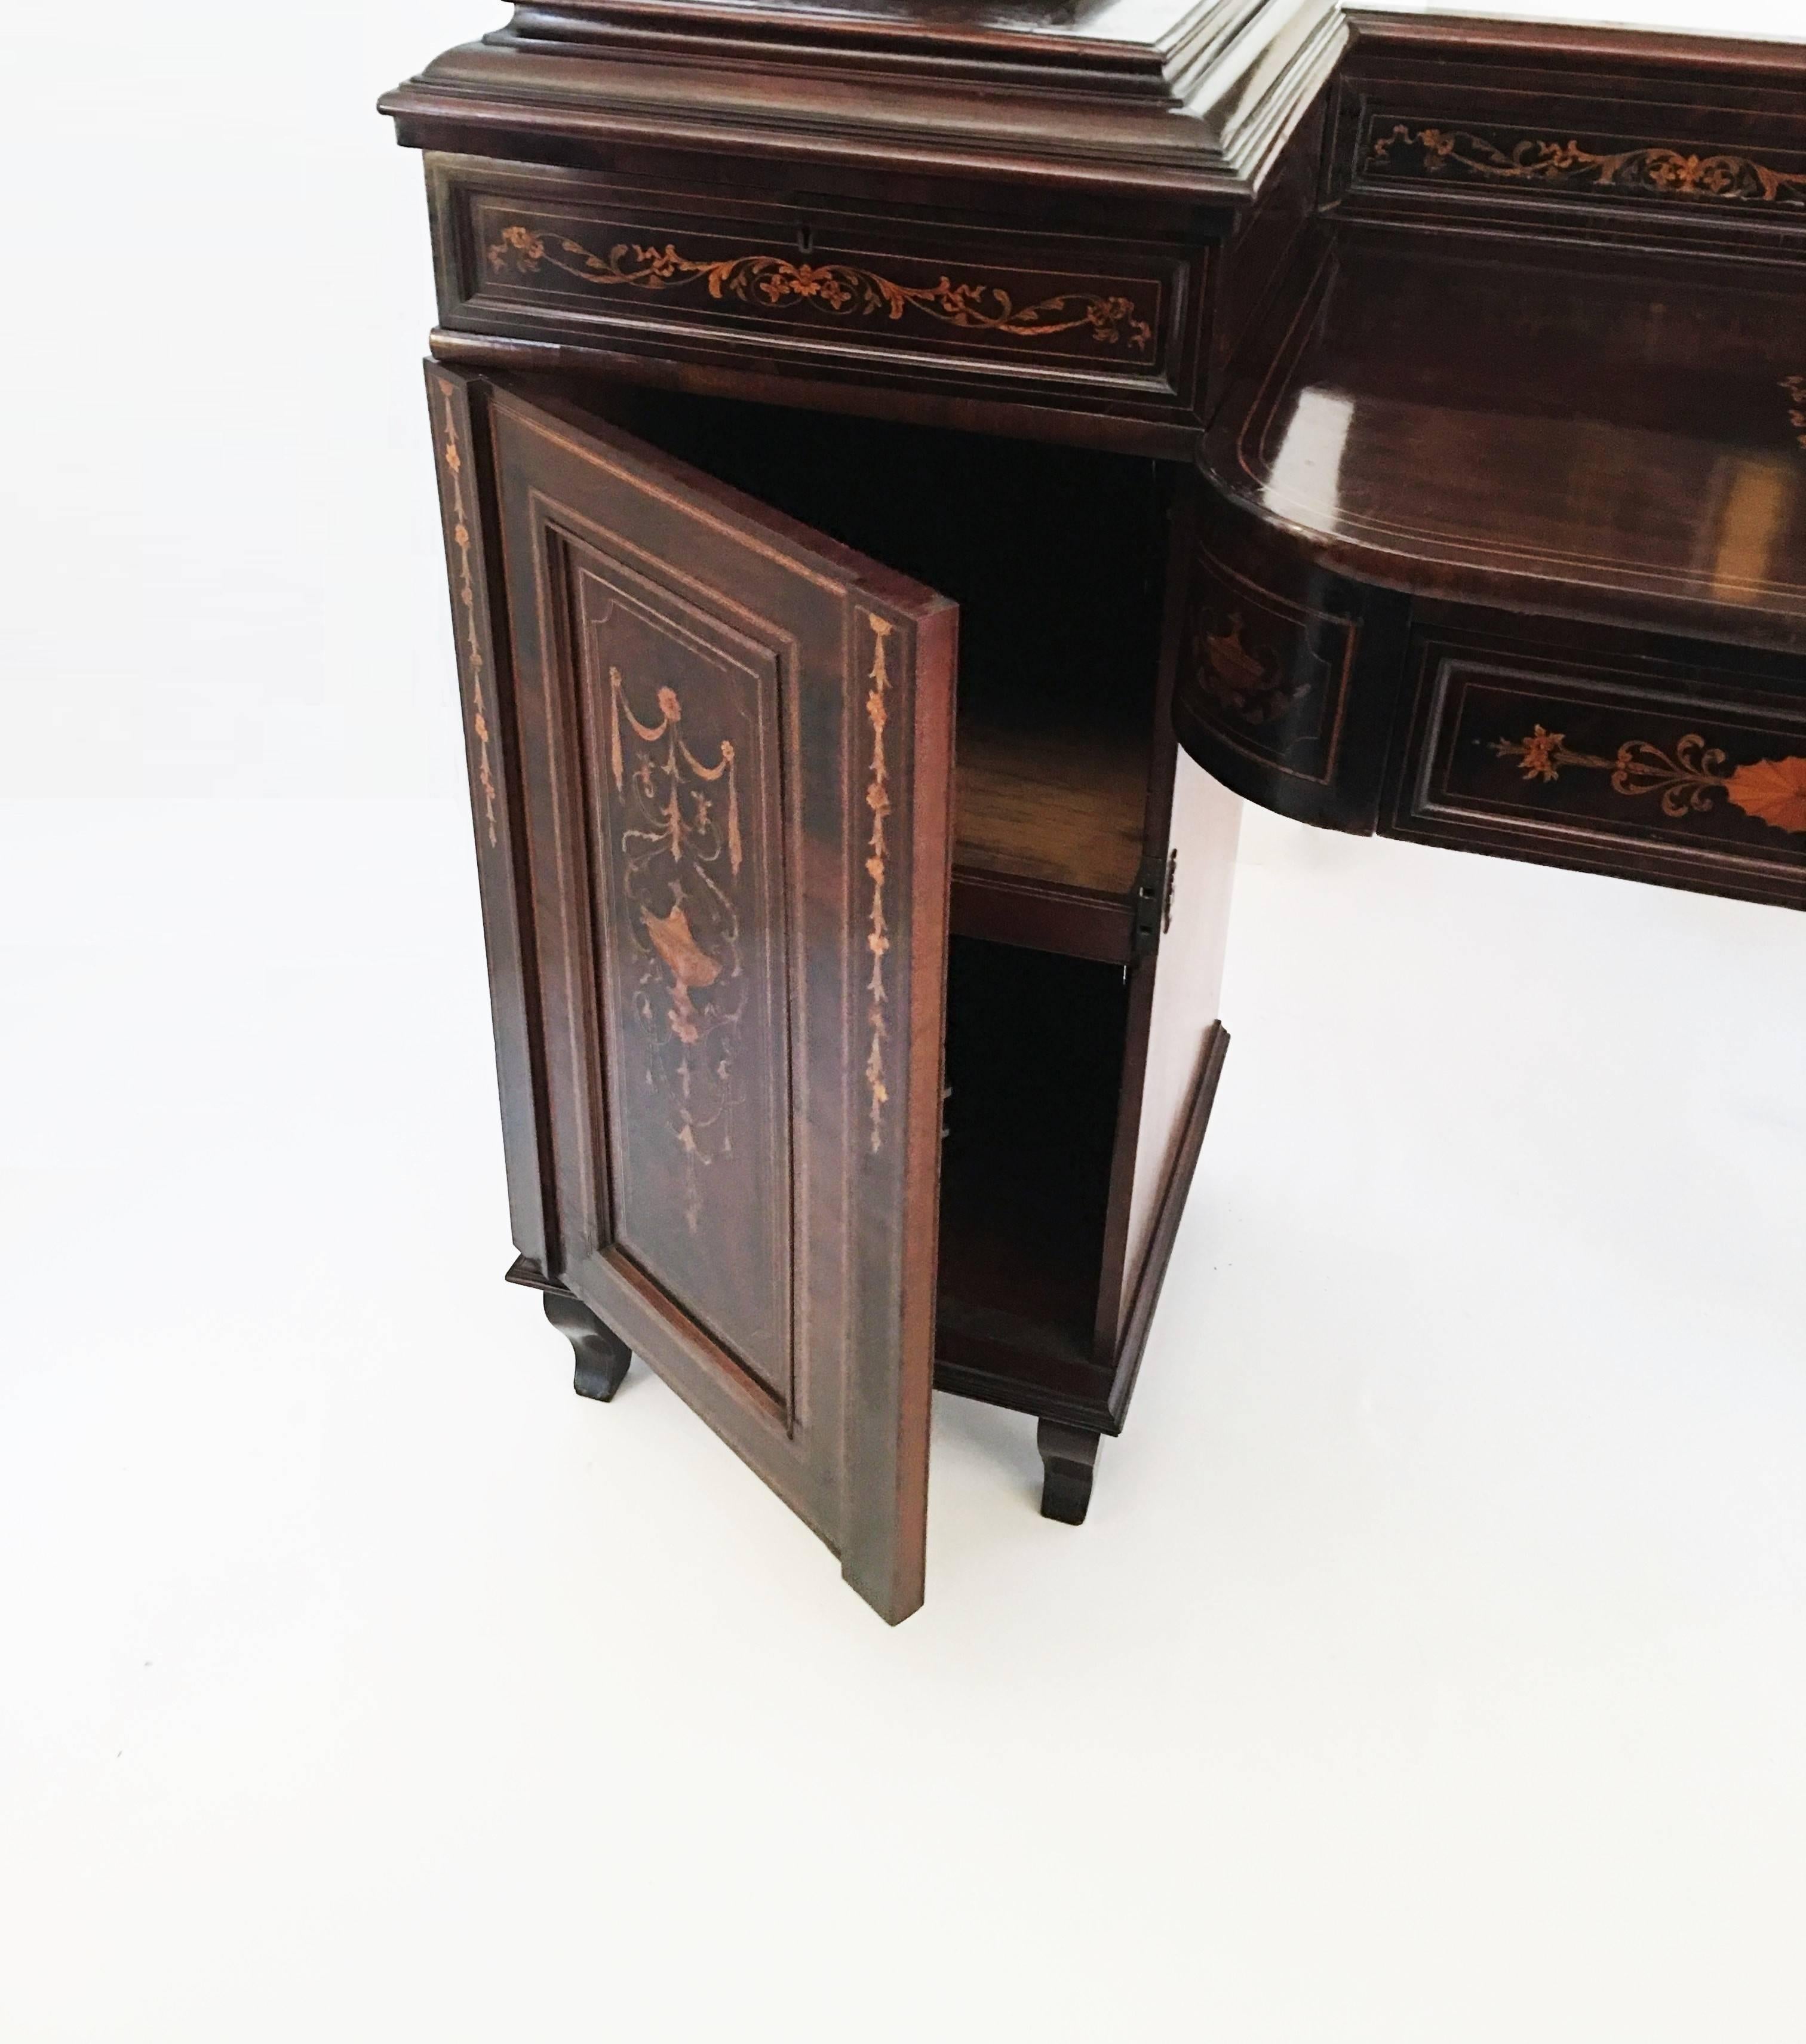 Early 19th Century Regency Marquetry Inlaid Rosewood Pedestal Sideboard with Urn For Sale 4